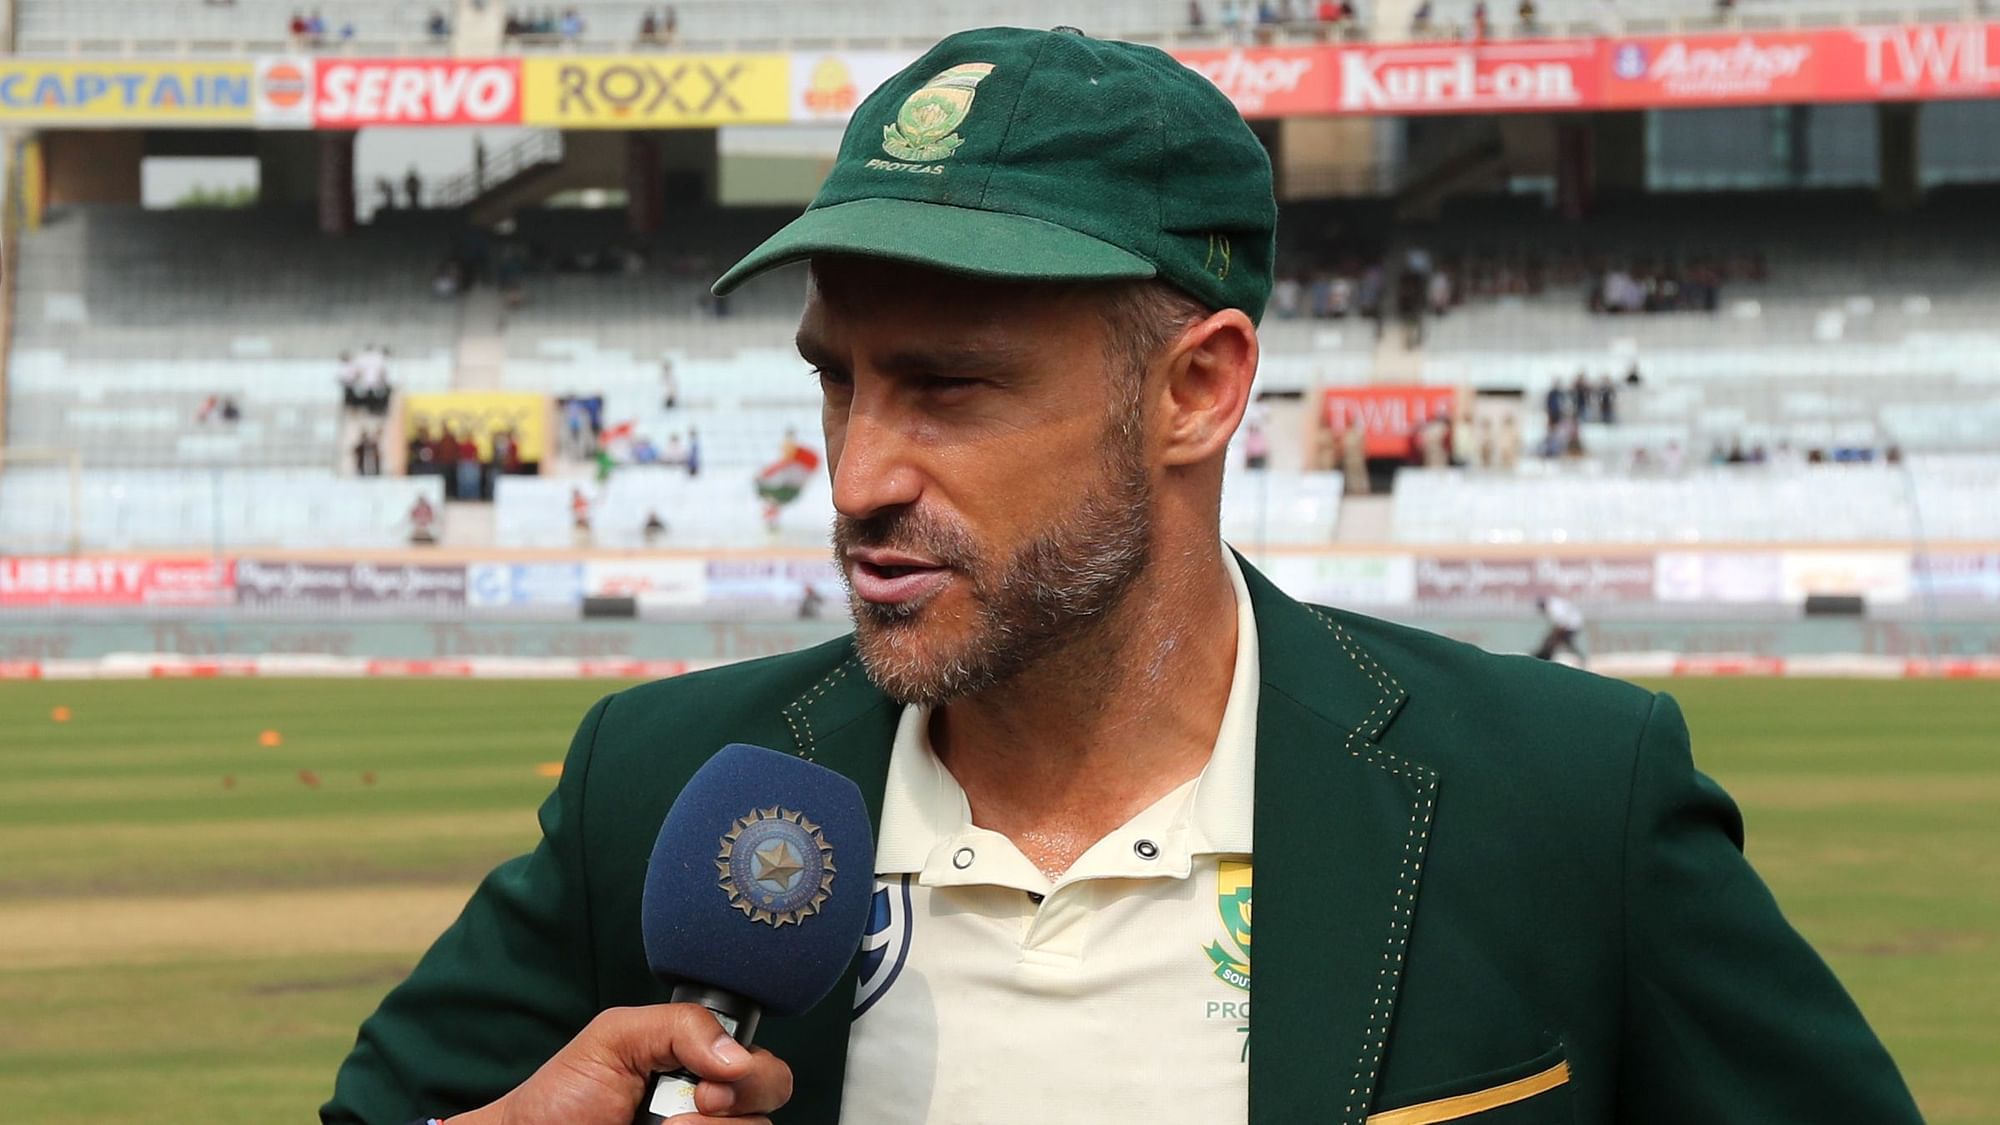 Faf du Plessis has expressed his views and spoken out in support of the Black Lives Matter movement.